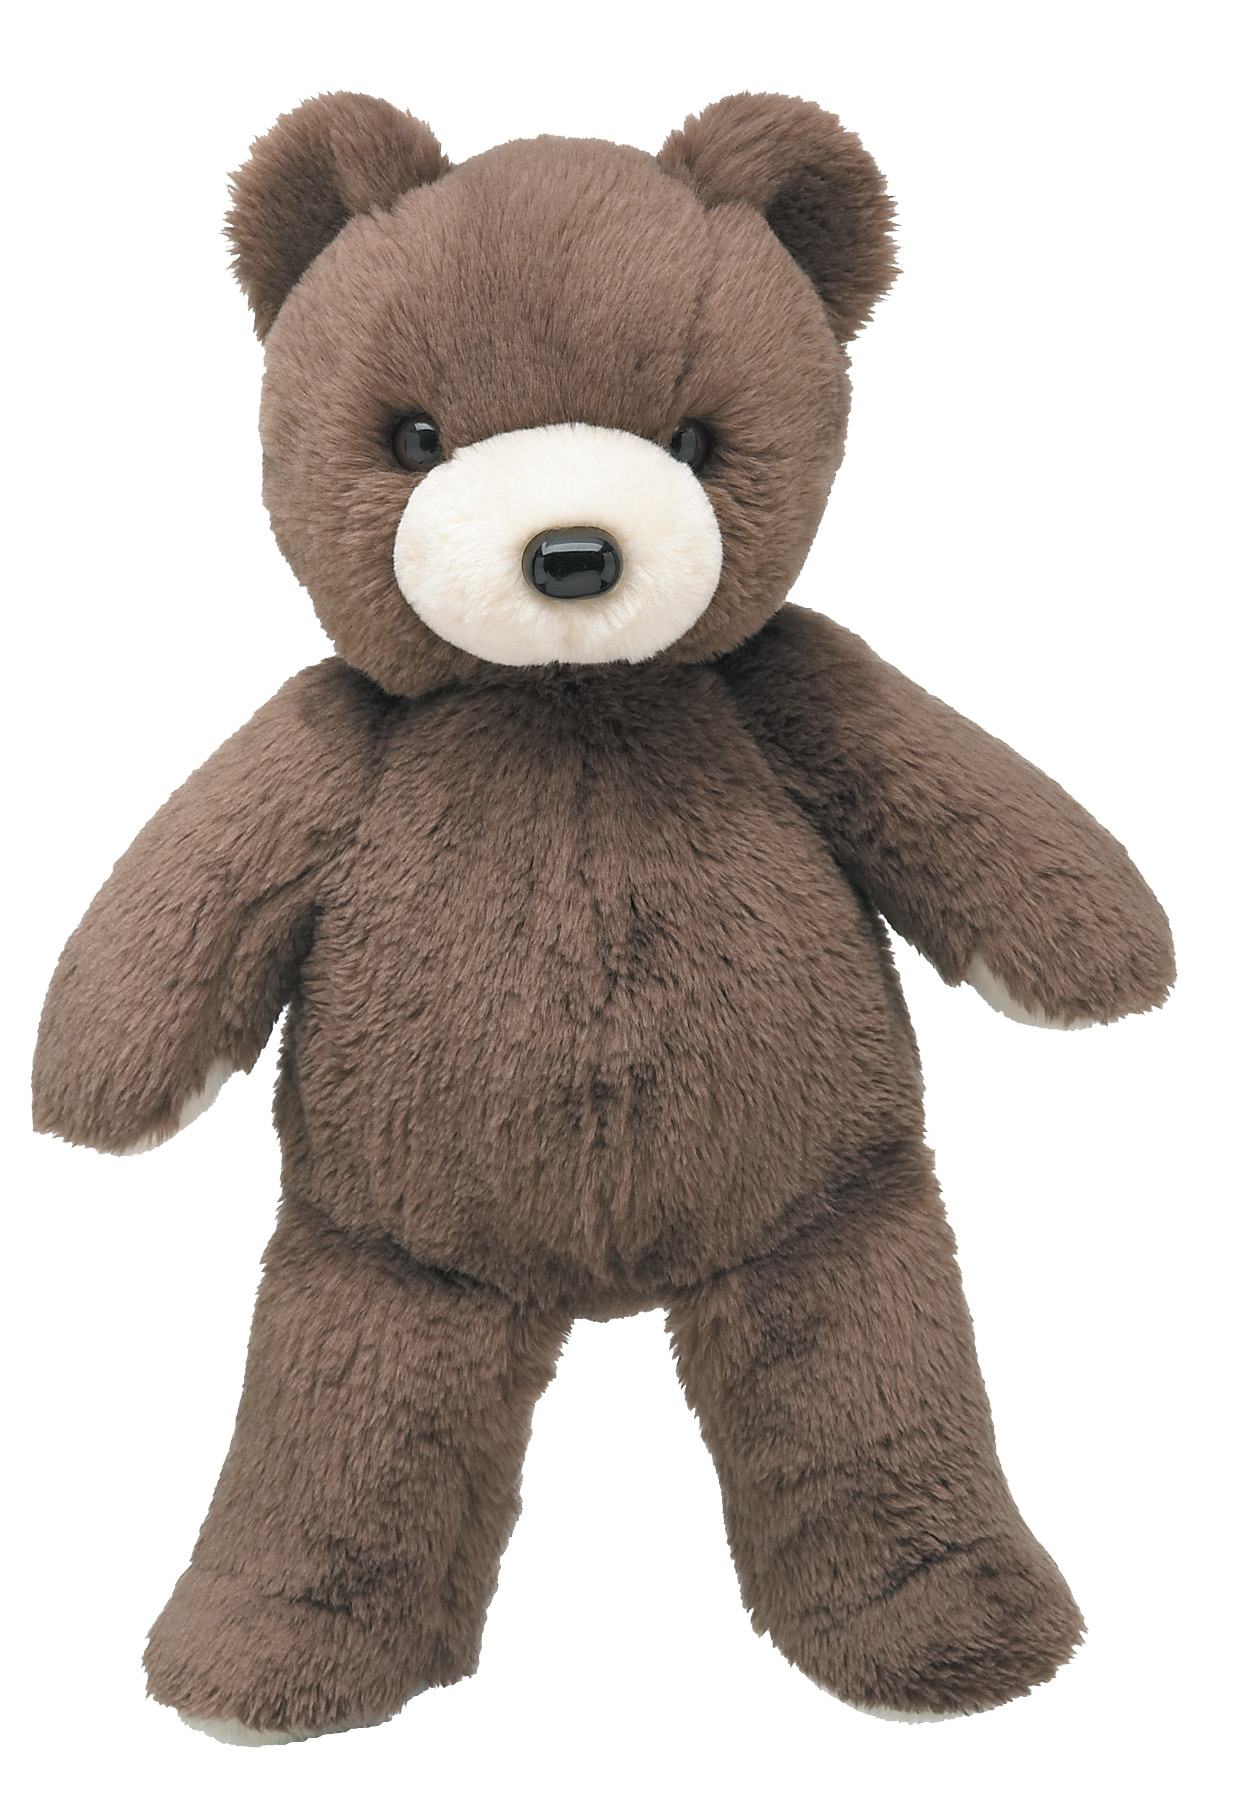 CPSC, Build-A-Bear Workshop Announce Recall of 